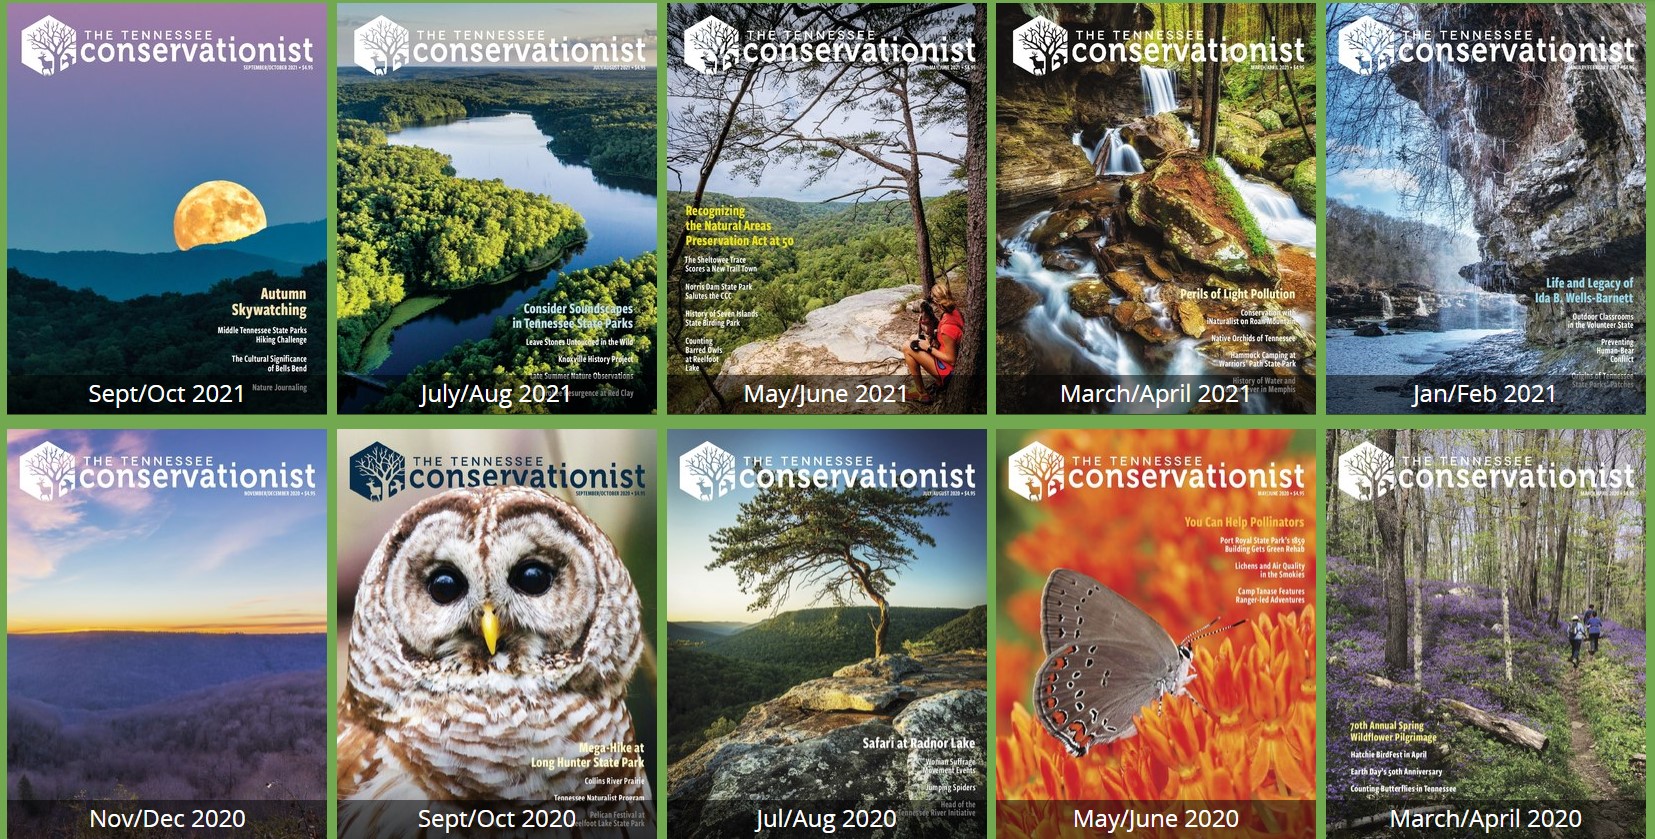 Screenshot of TN Conservationist magazine covers